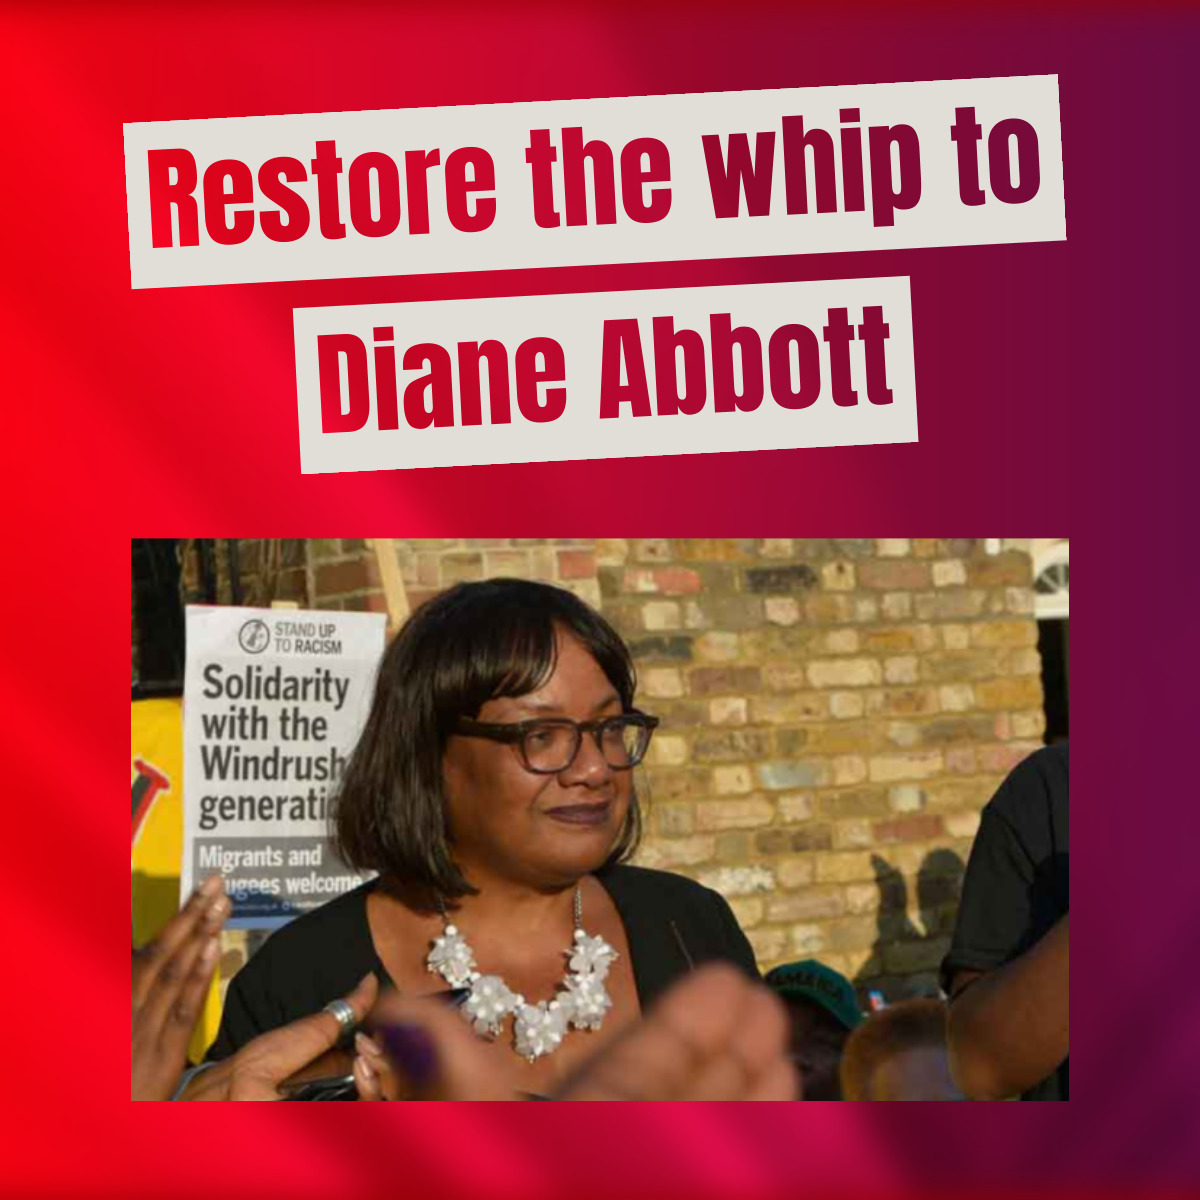 BREAKING: #DianeAbbott - Surge in support as petition reaches 15k 📣 Now Keir Starmer must restore the whip 🌹 👉 Read about support from @johnmcdonnellMP, Shami Chakrabarti, @SabbyDhalu, @sarahwoolley01 & more at labouroutlook.org/2024/05/24/dia… 👉 Add name at actionnetwork.org/petitions/rest…